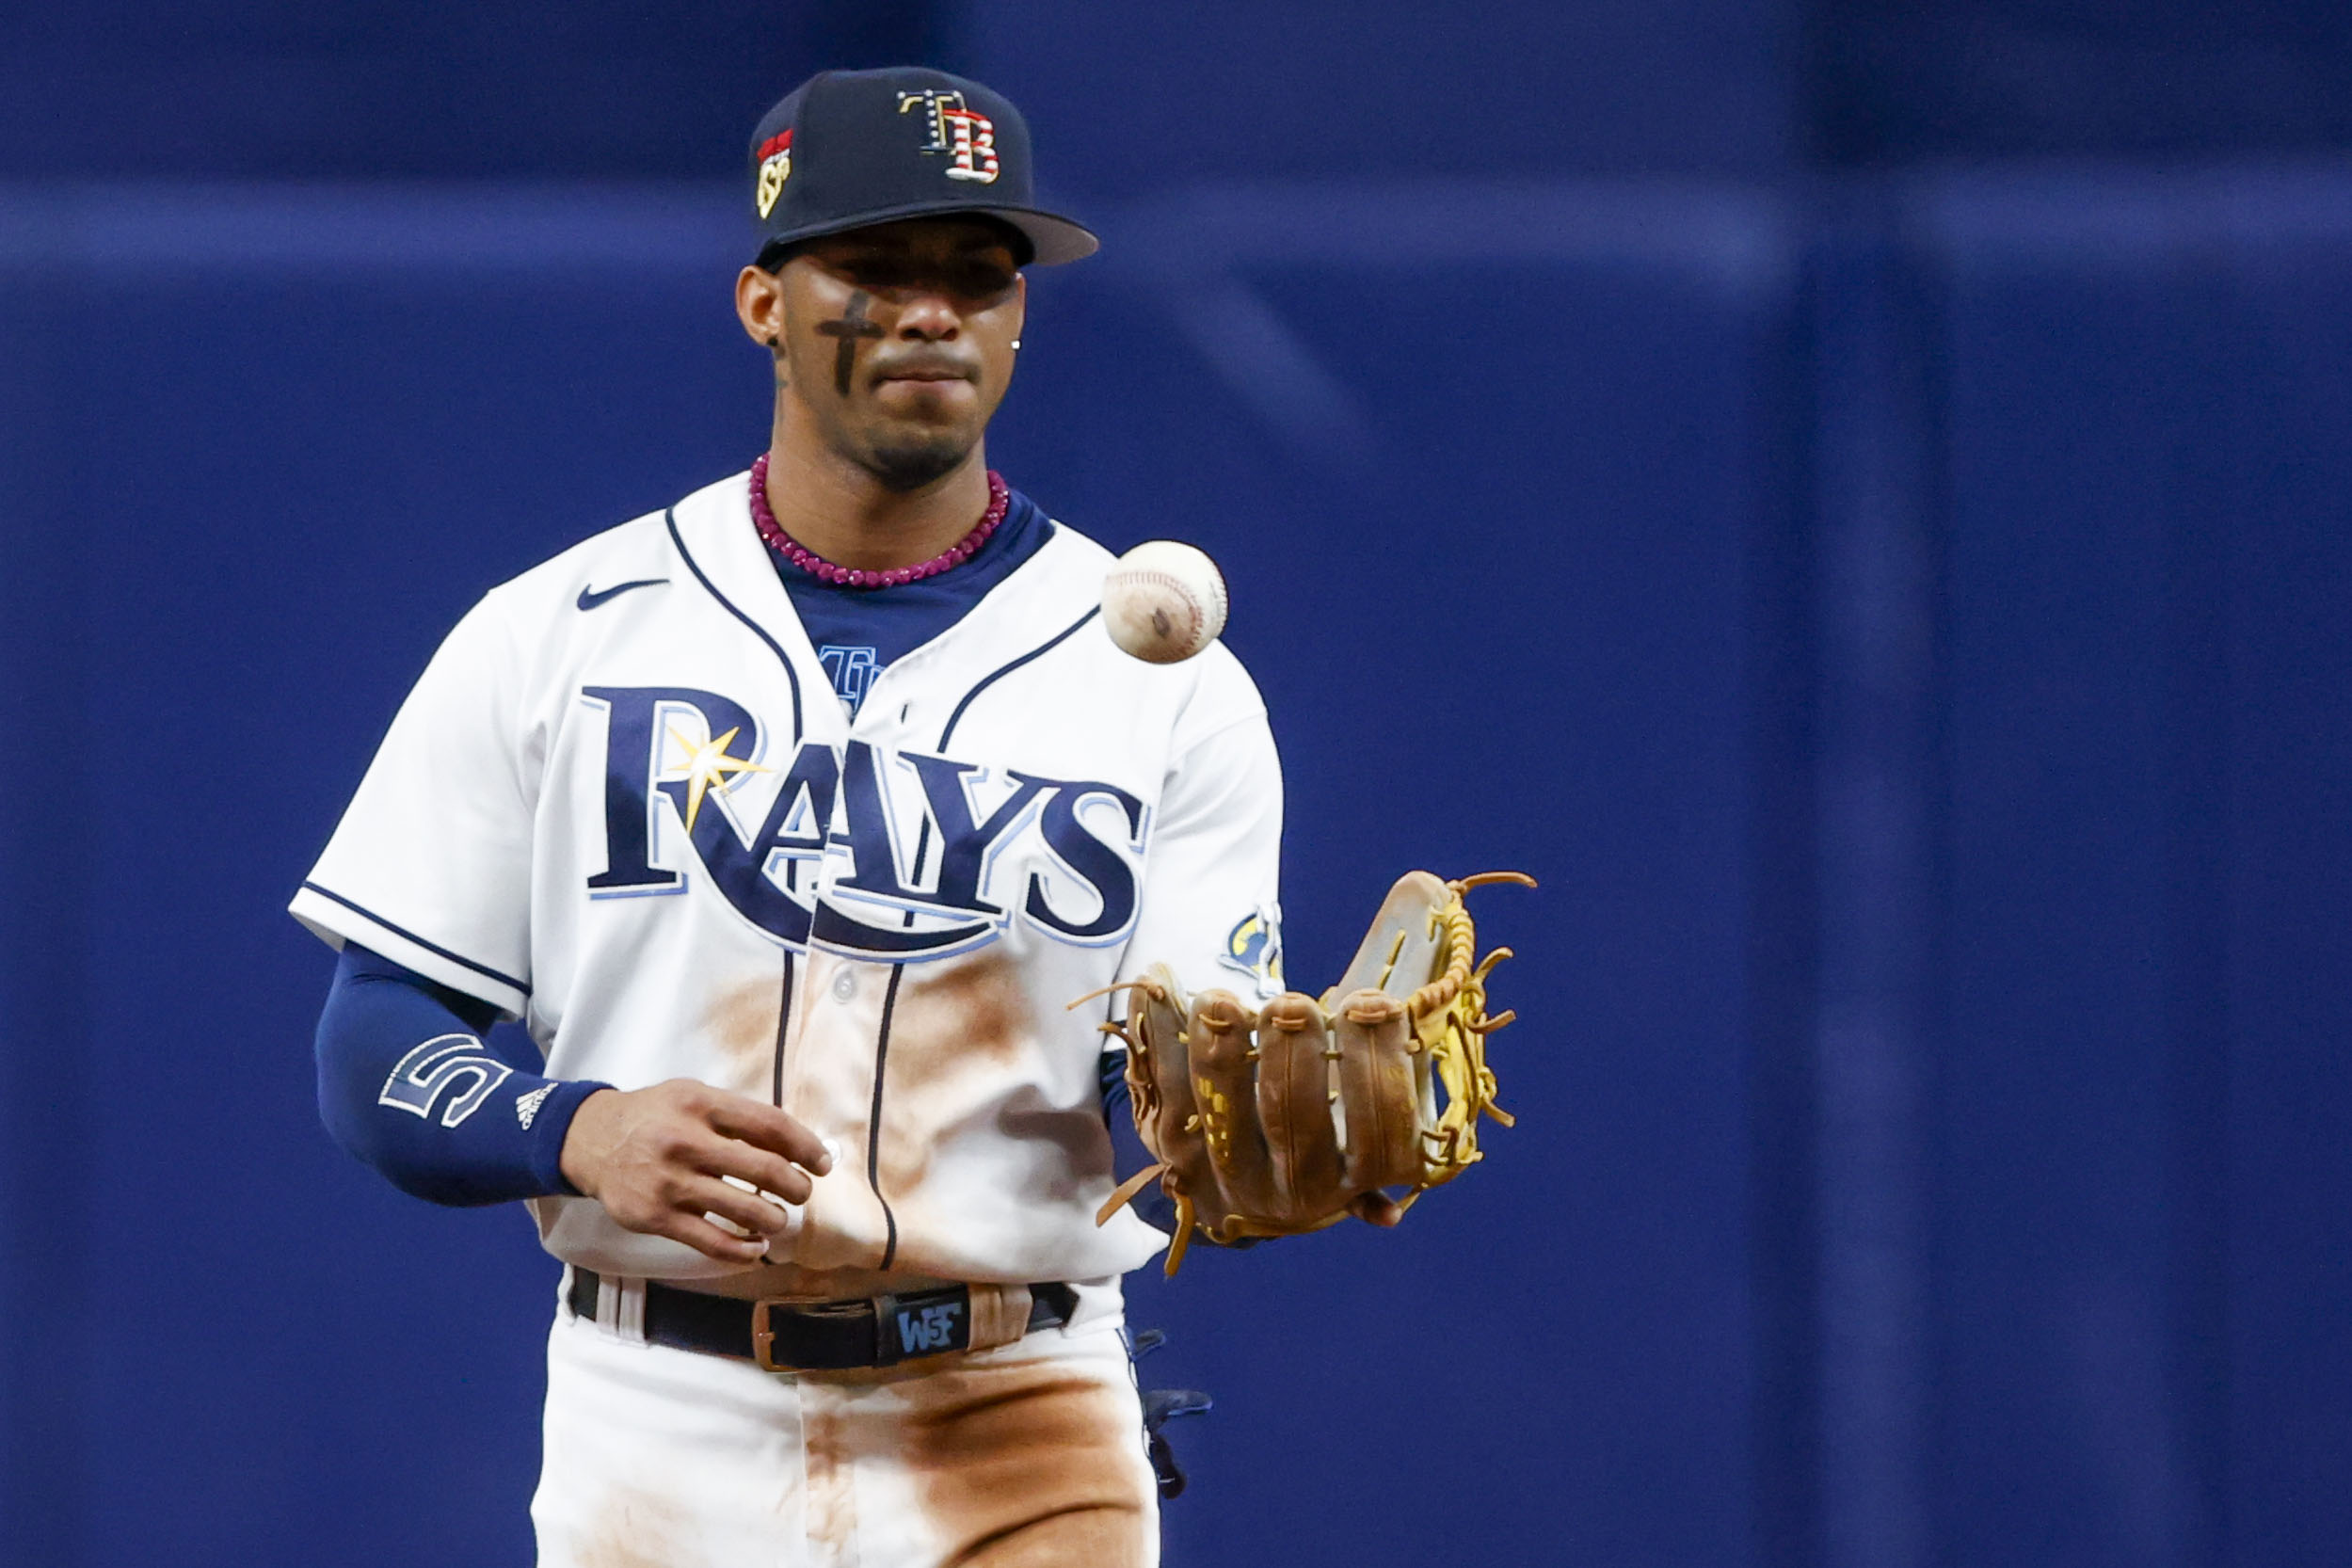 Rays' Isaac Paredes breaks home run record hitting his 30th of the season  amid Arozarena injury